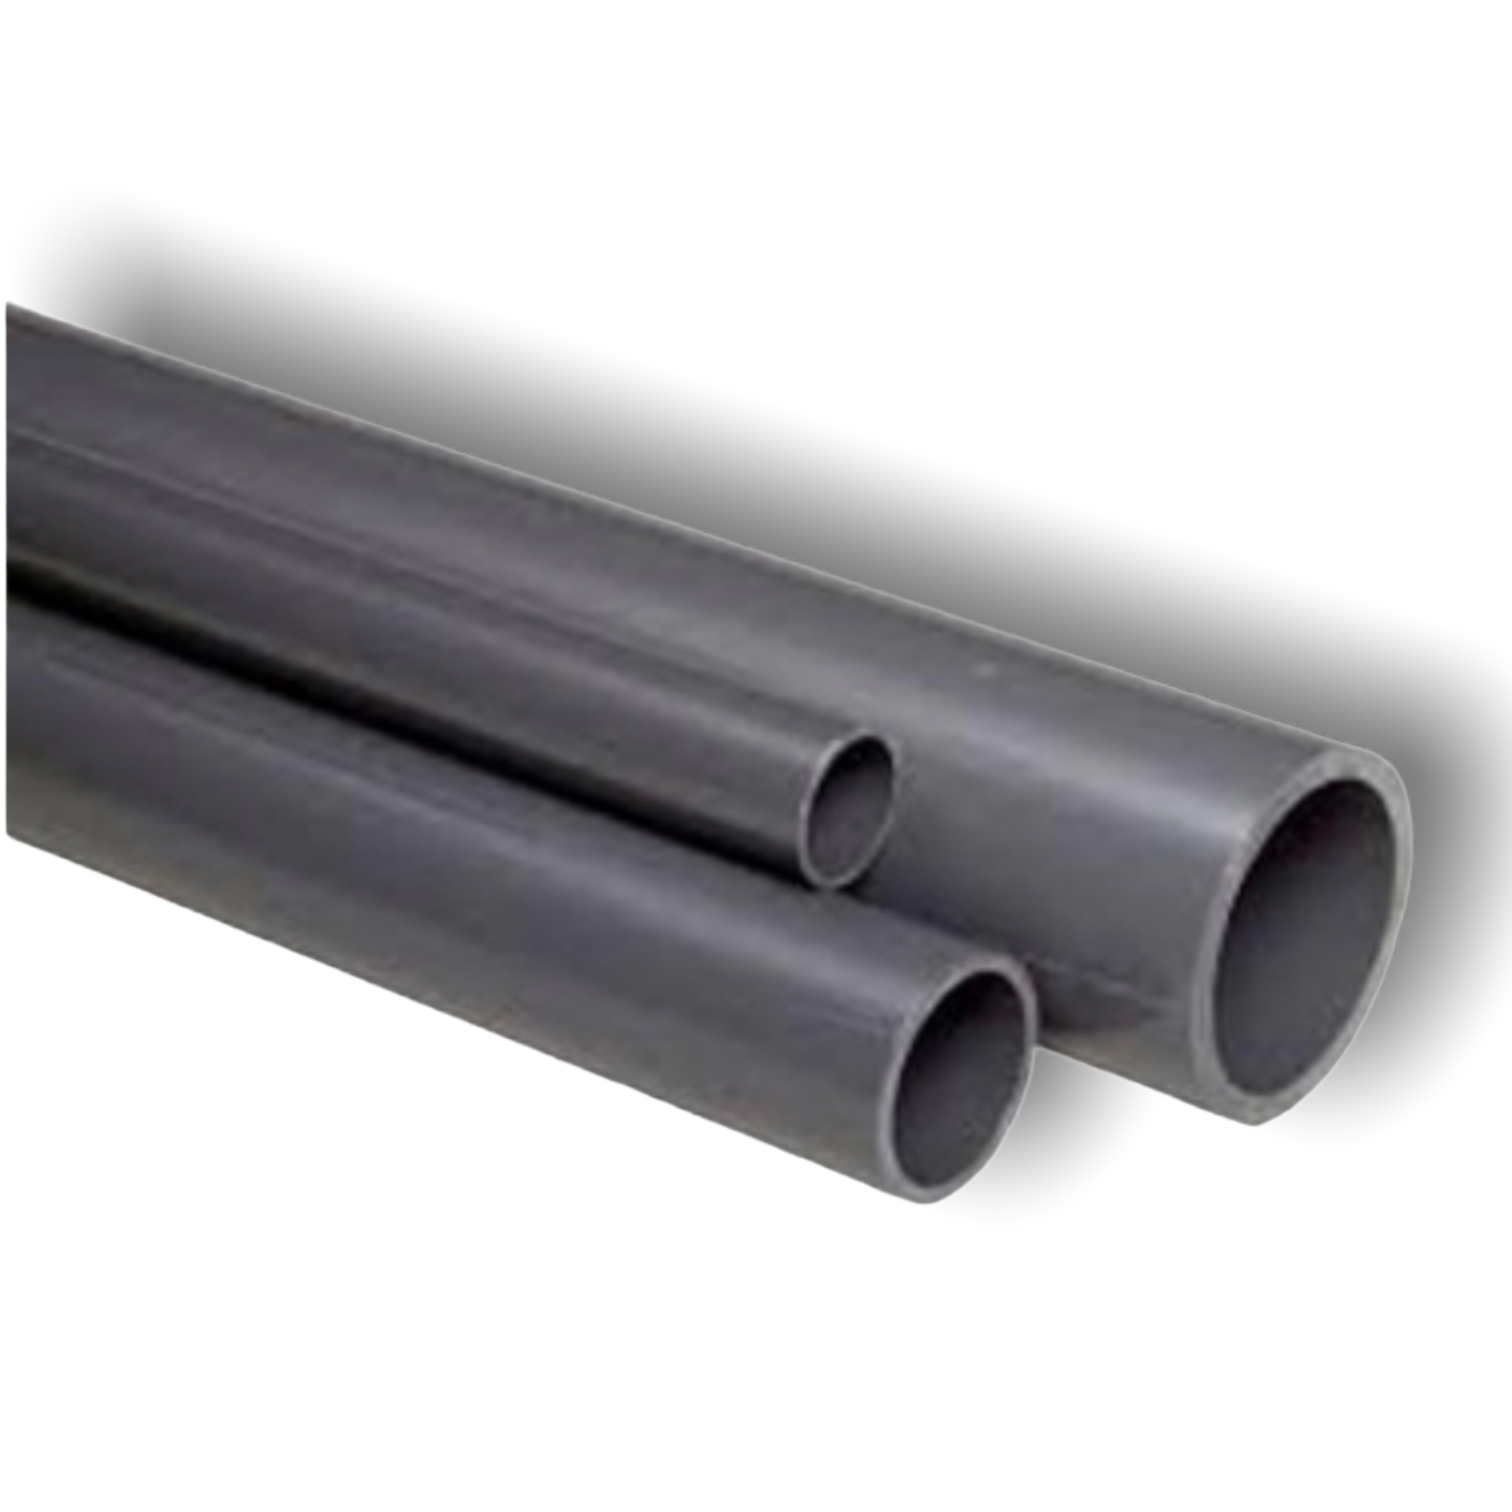 25mm PVC Pipe (Solvent Weld)